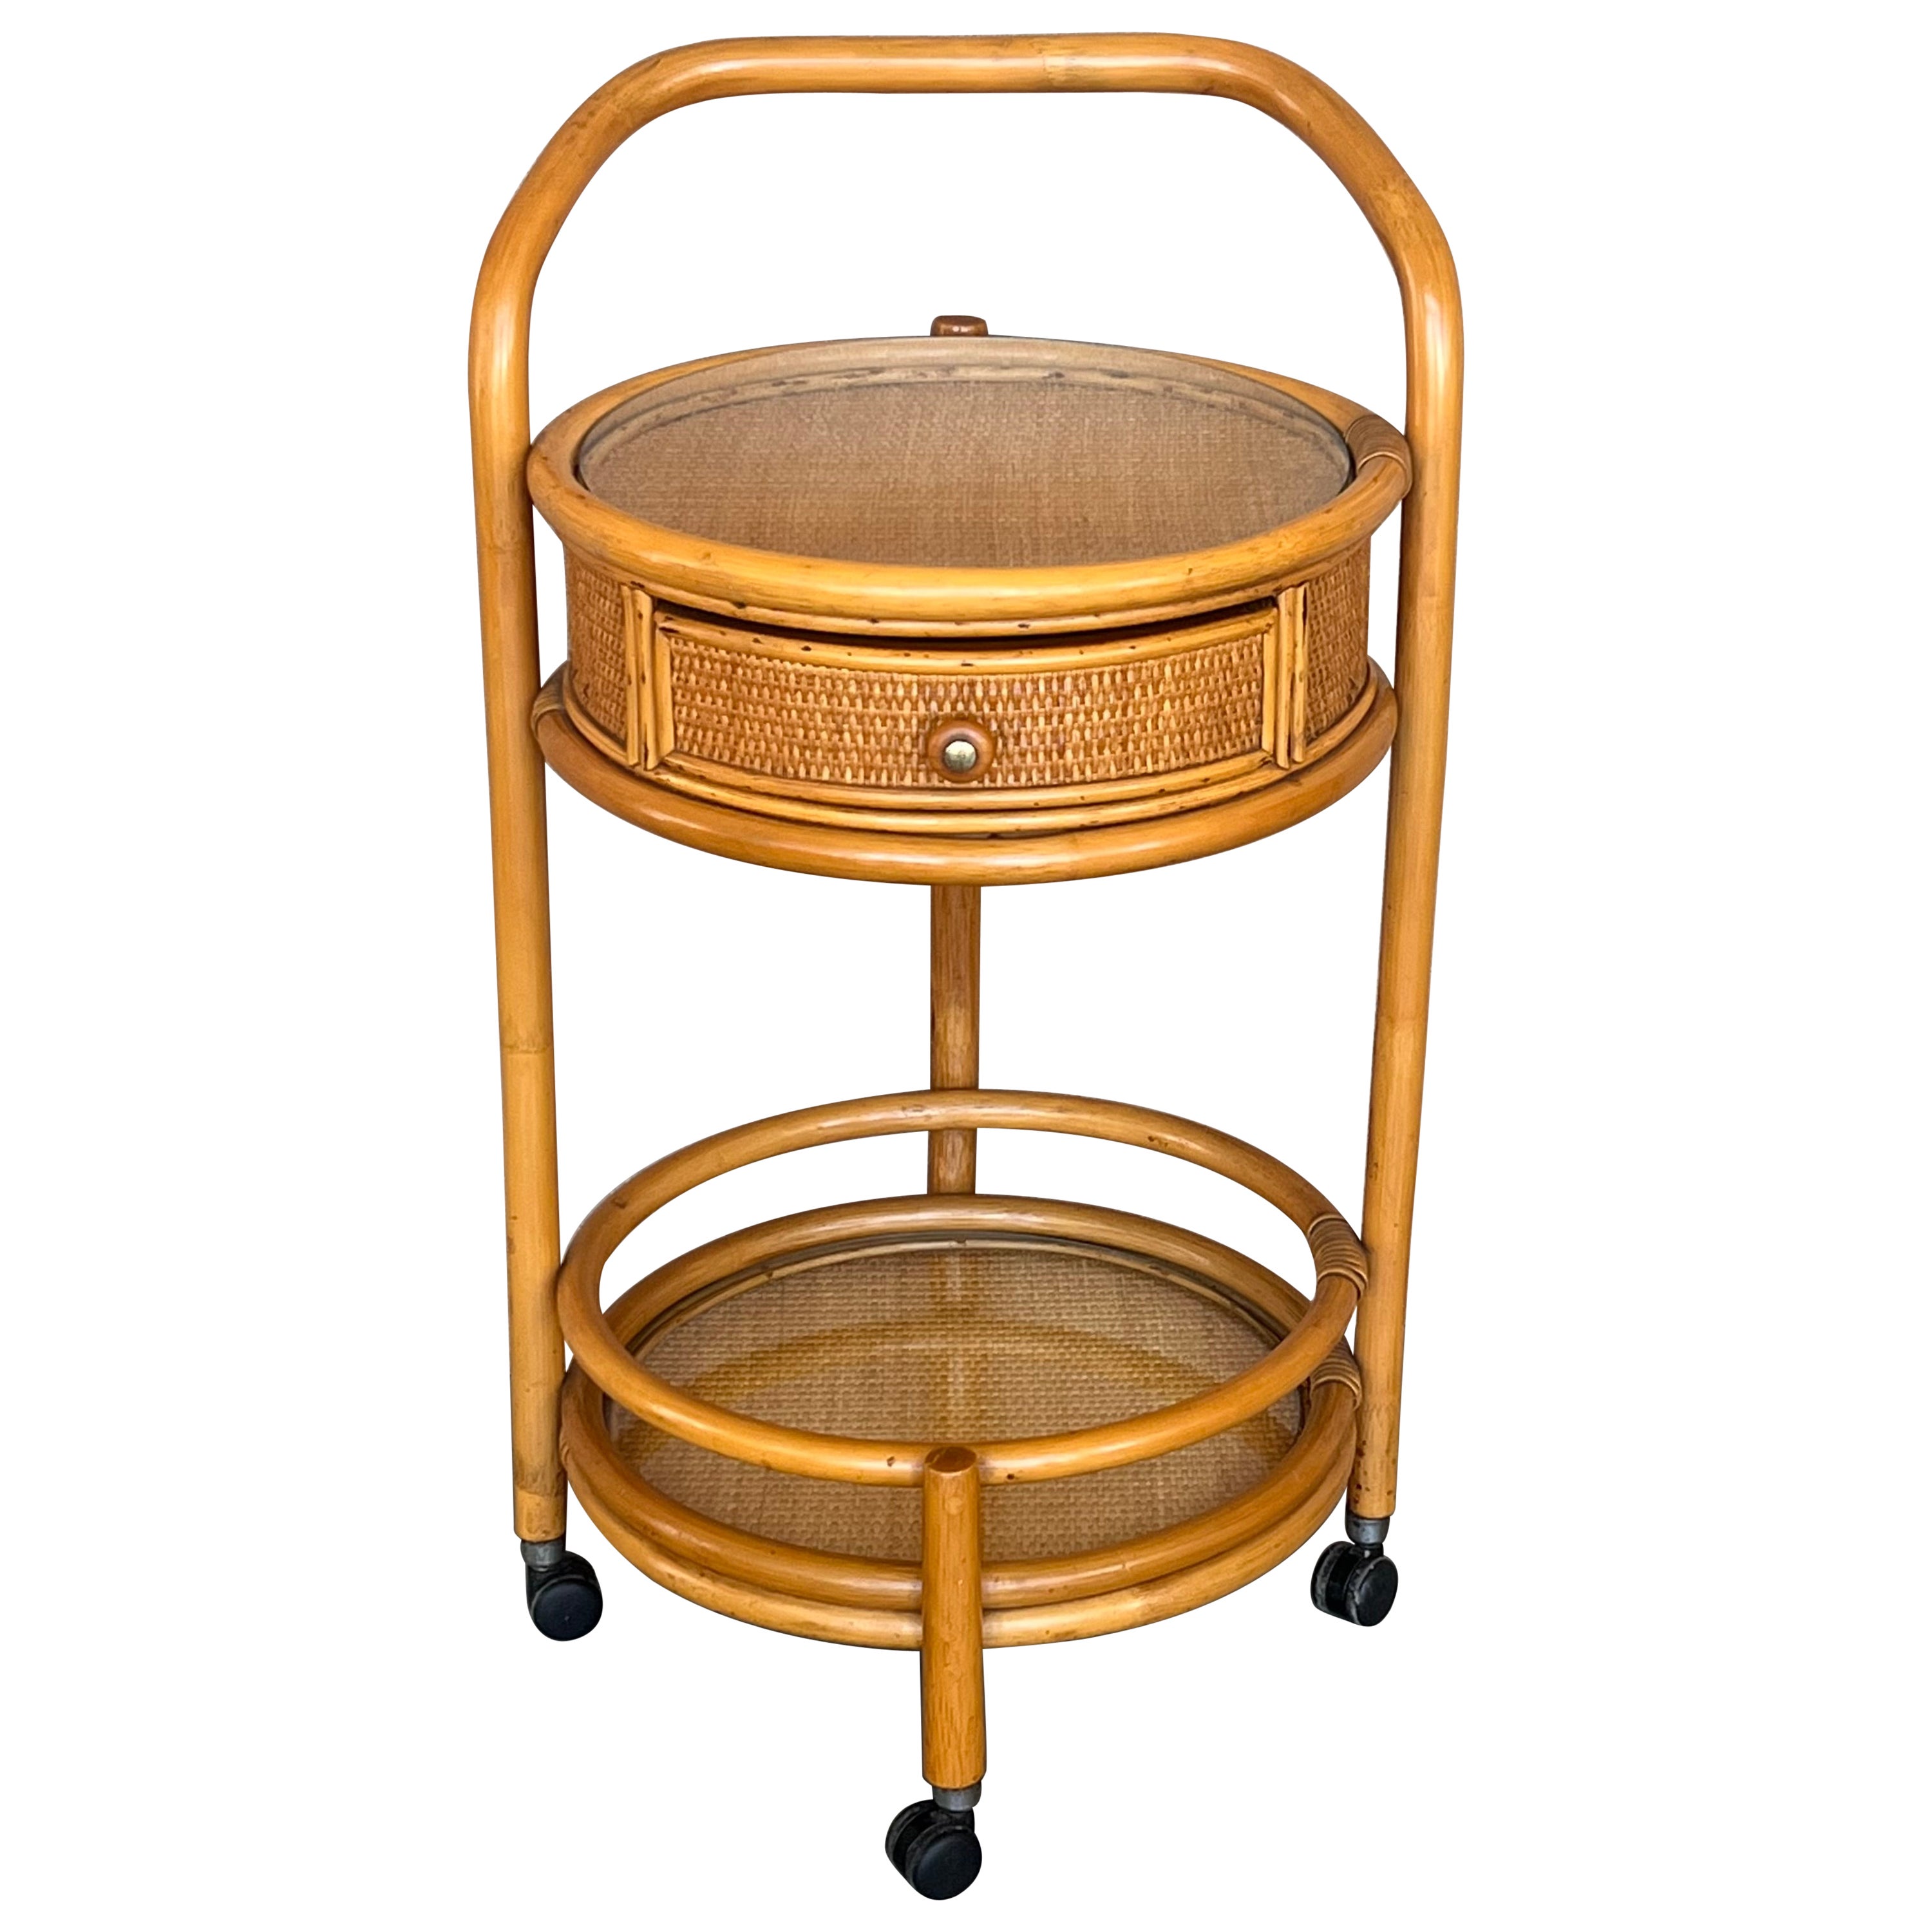 Mid 20th Century Round Serving Bar Cart Trolley in Bamboo & Rattan Italy, 1960s For Sale